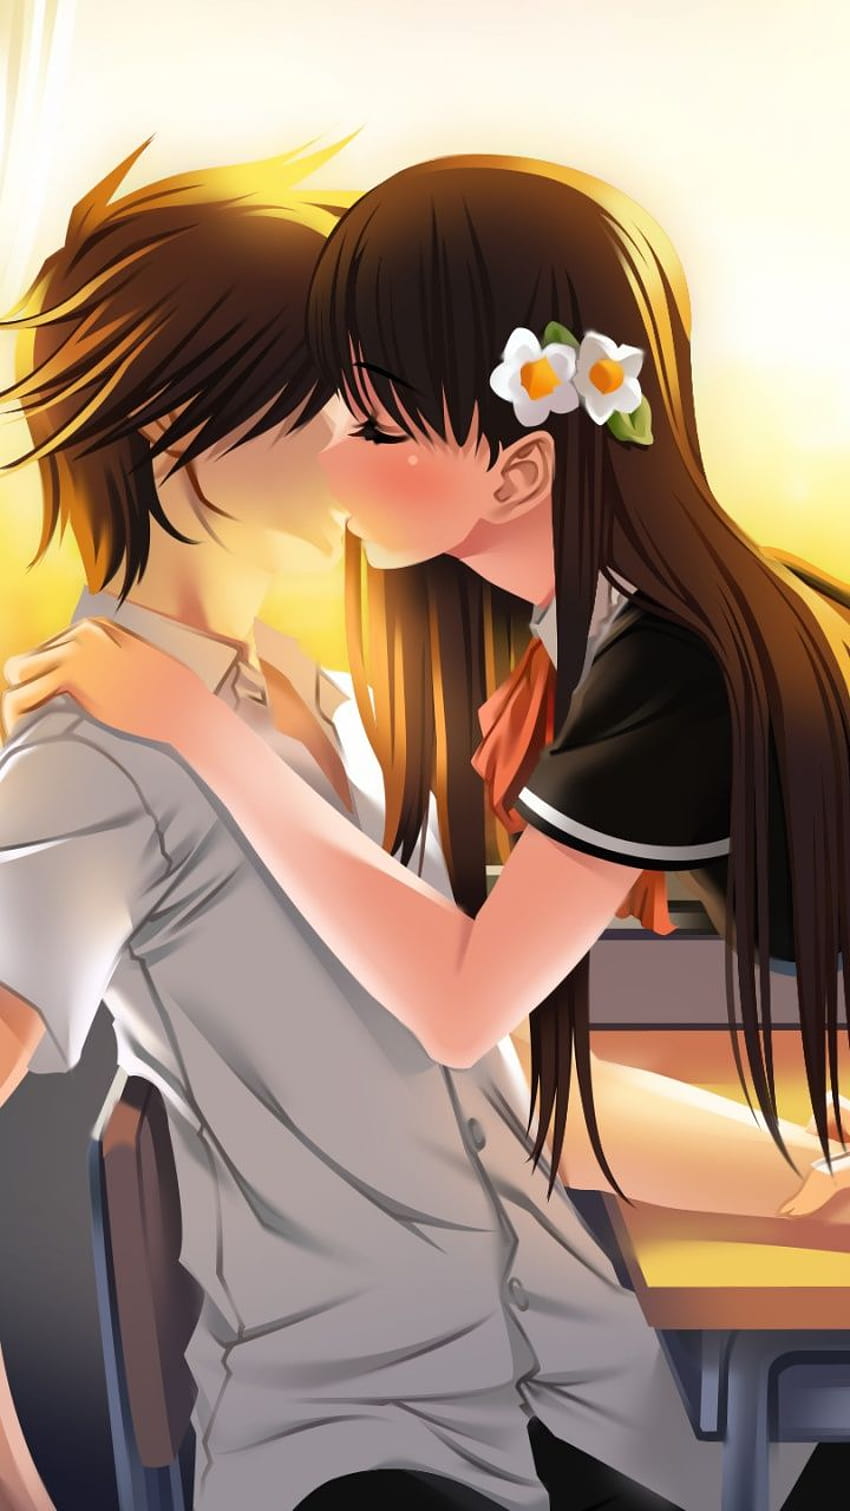 What are some of the cutest anime kiss scenes? - Quora